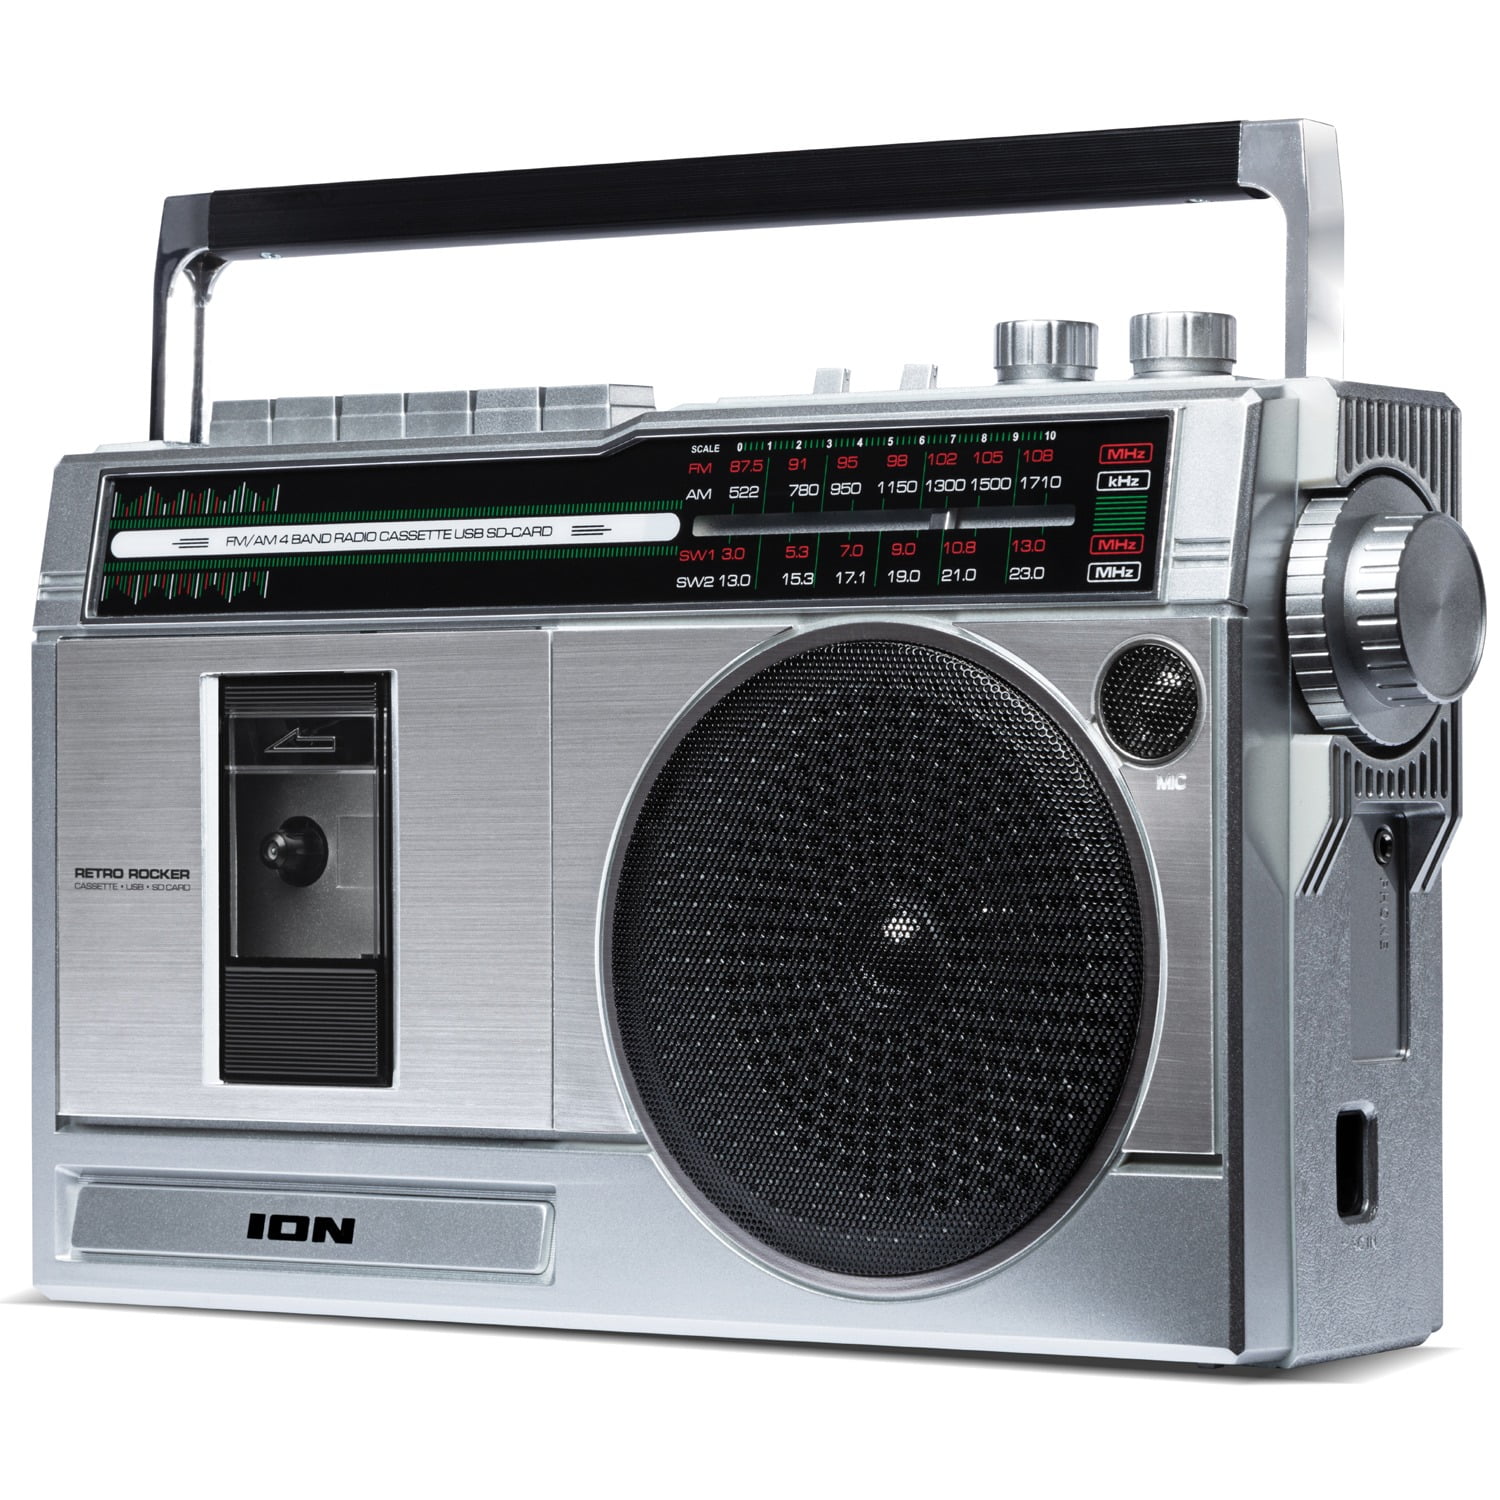 Cassette Players with Radio